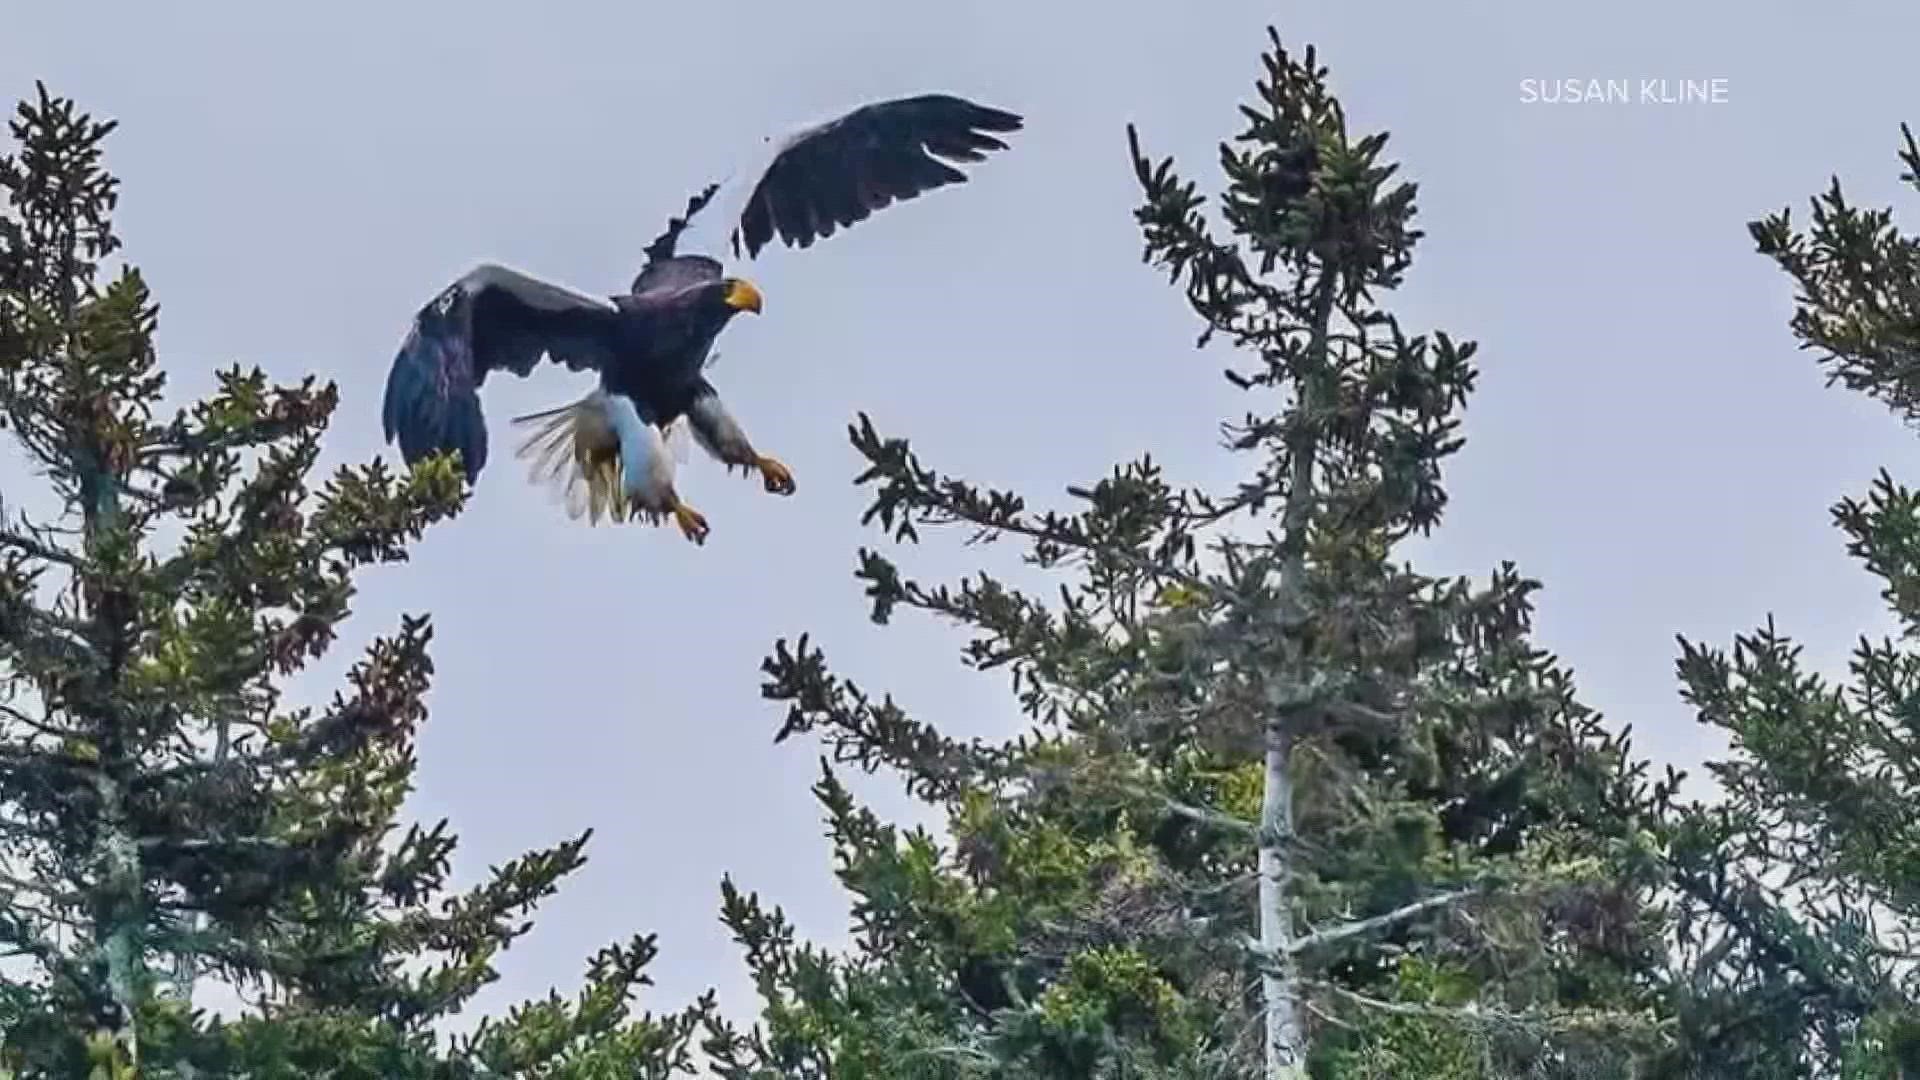 Bird expert Dan Gardoqui explains why the Steller's Sea Eagle might be in Maine and where else it has been spotted this year in North America.